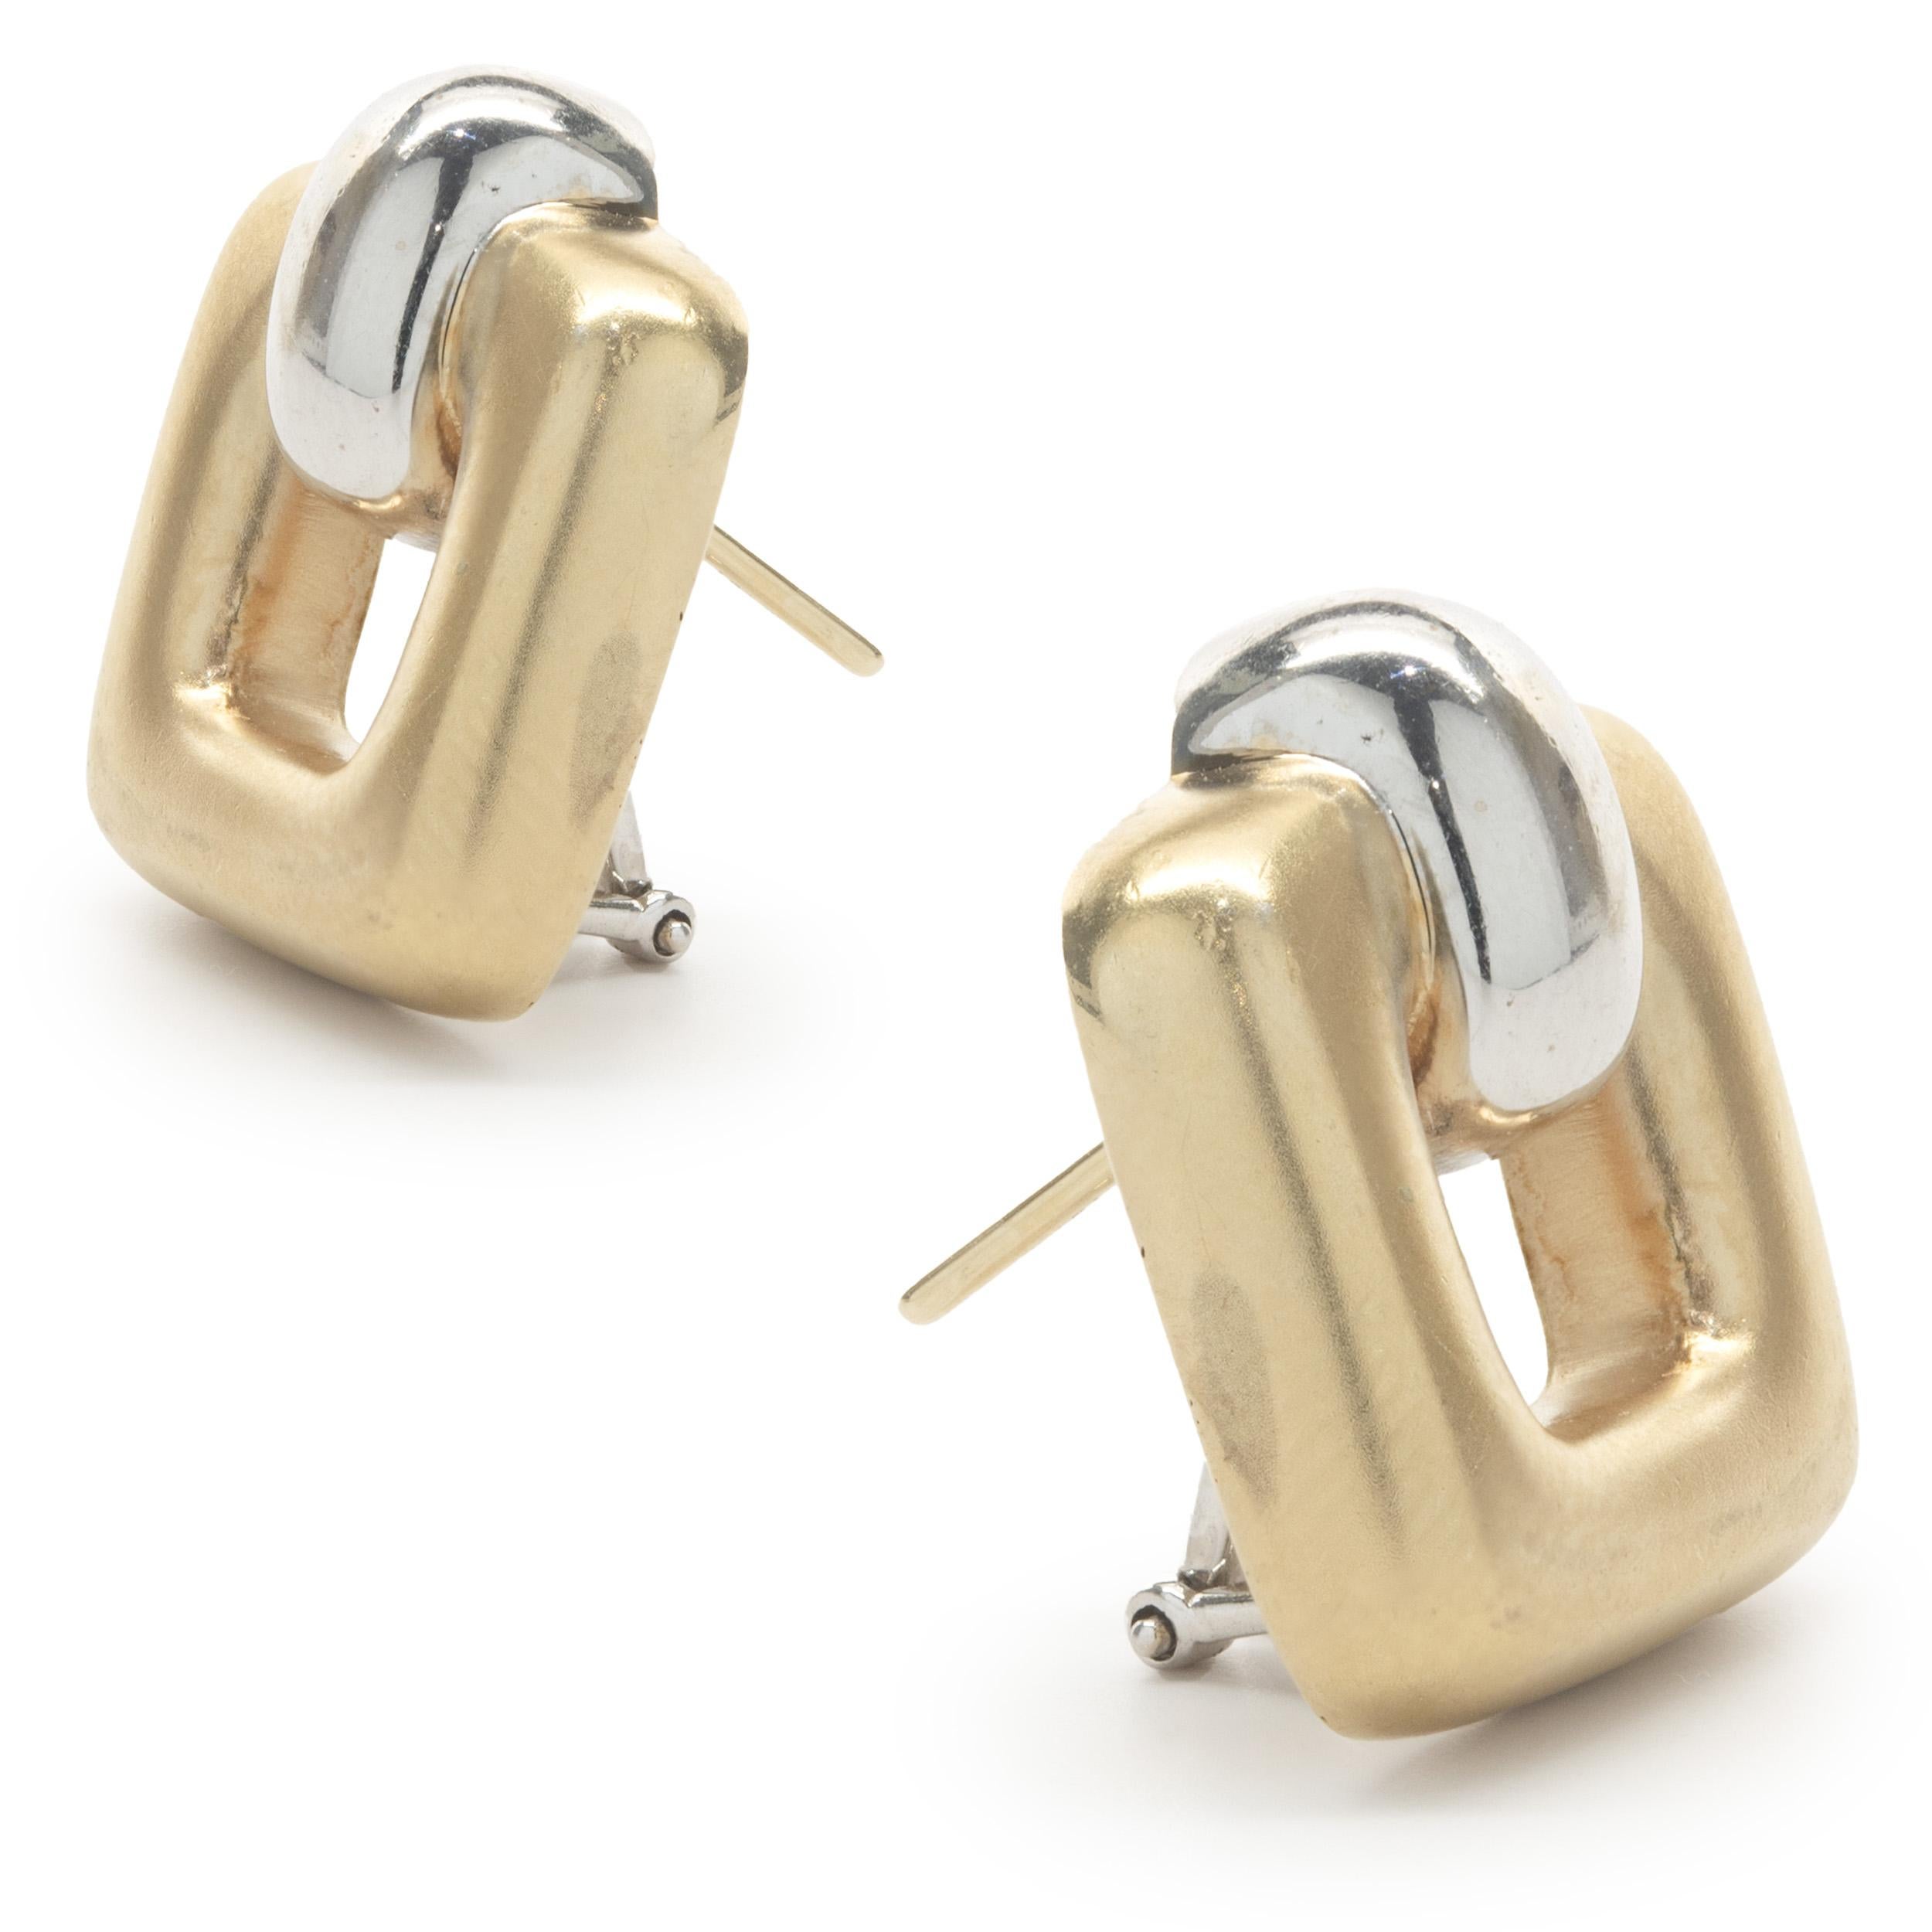 Material: 14K white & yellow  gold
Dimensions: earrings measure 19.4mm in length
Weight: 10.84 grams